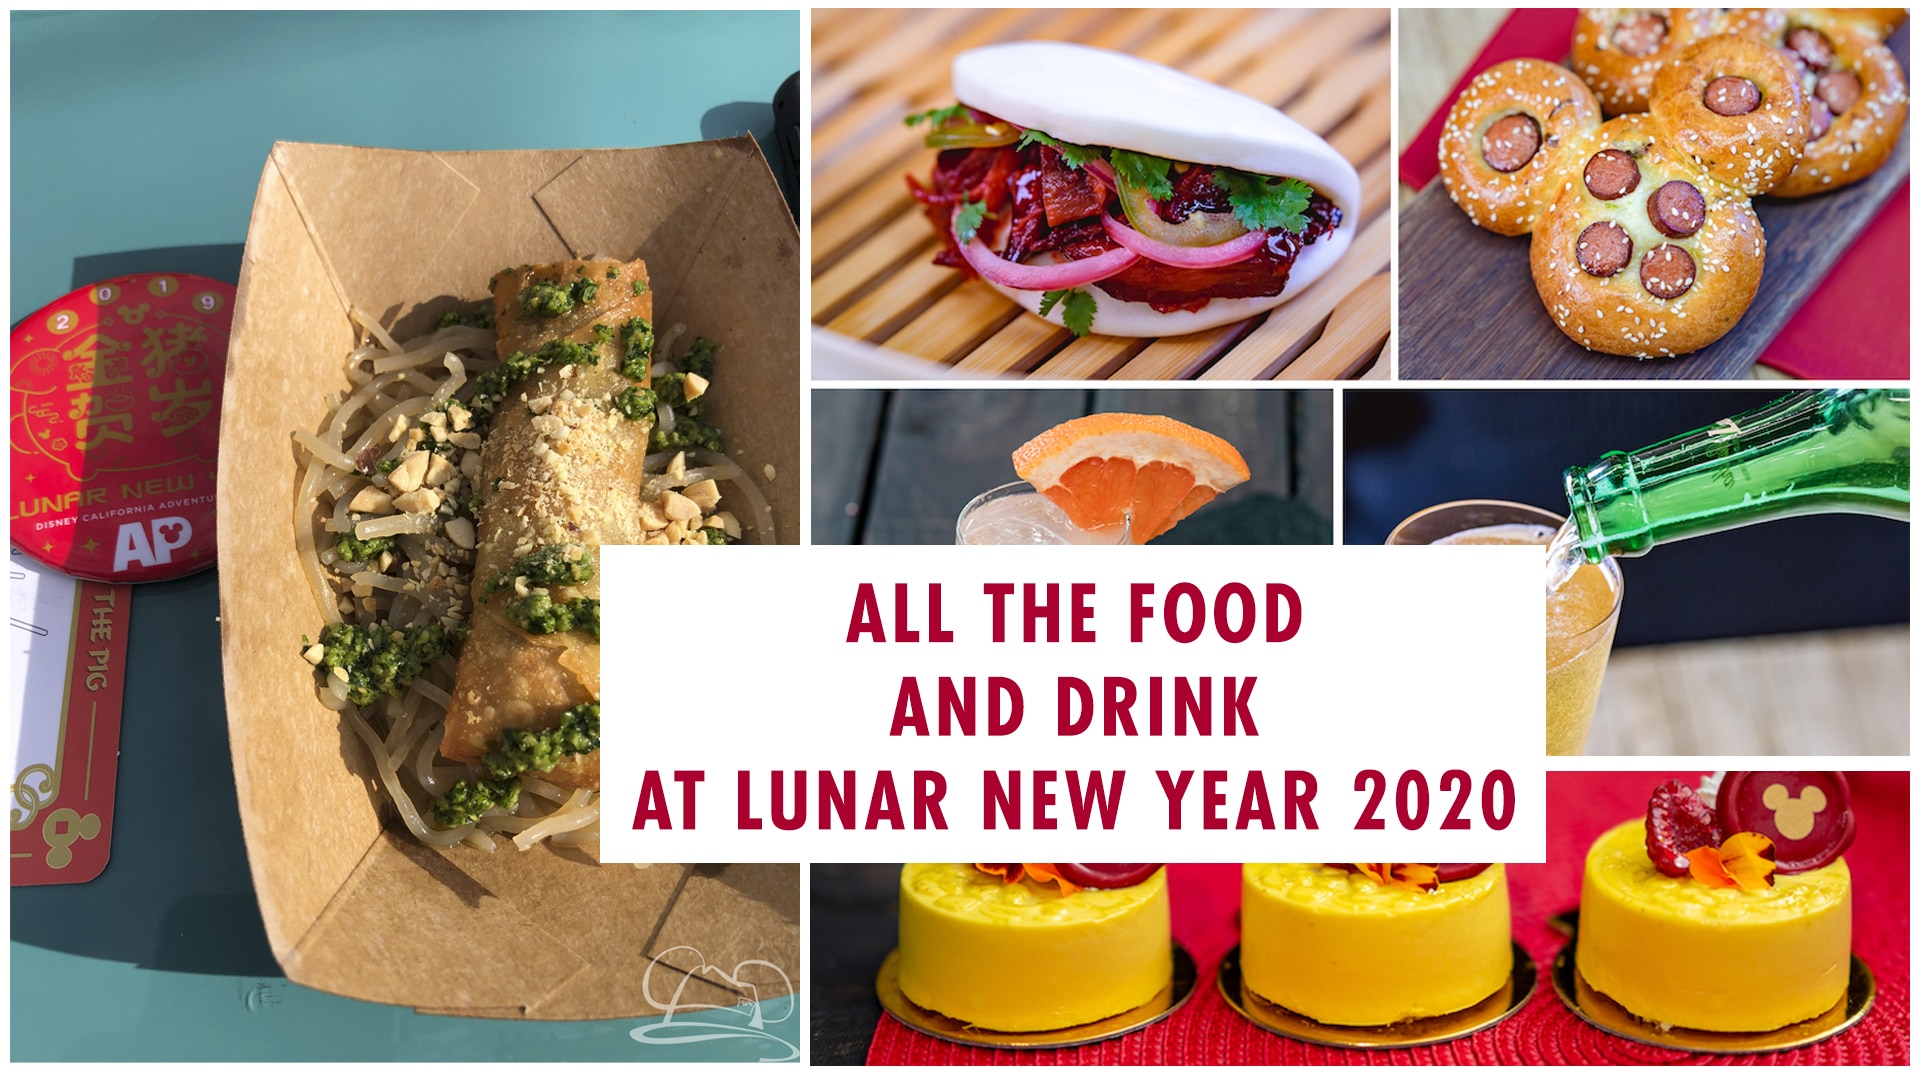 Guide to Food and Drink at Lunar New Year in Disney California Adventure